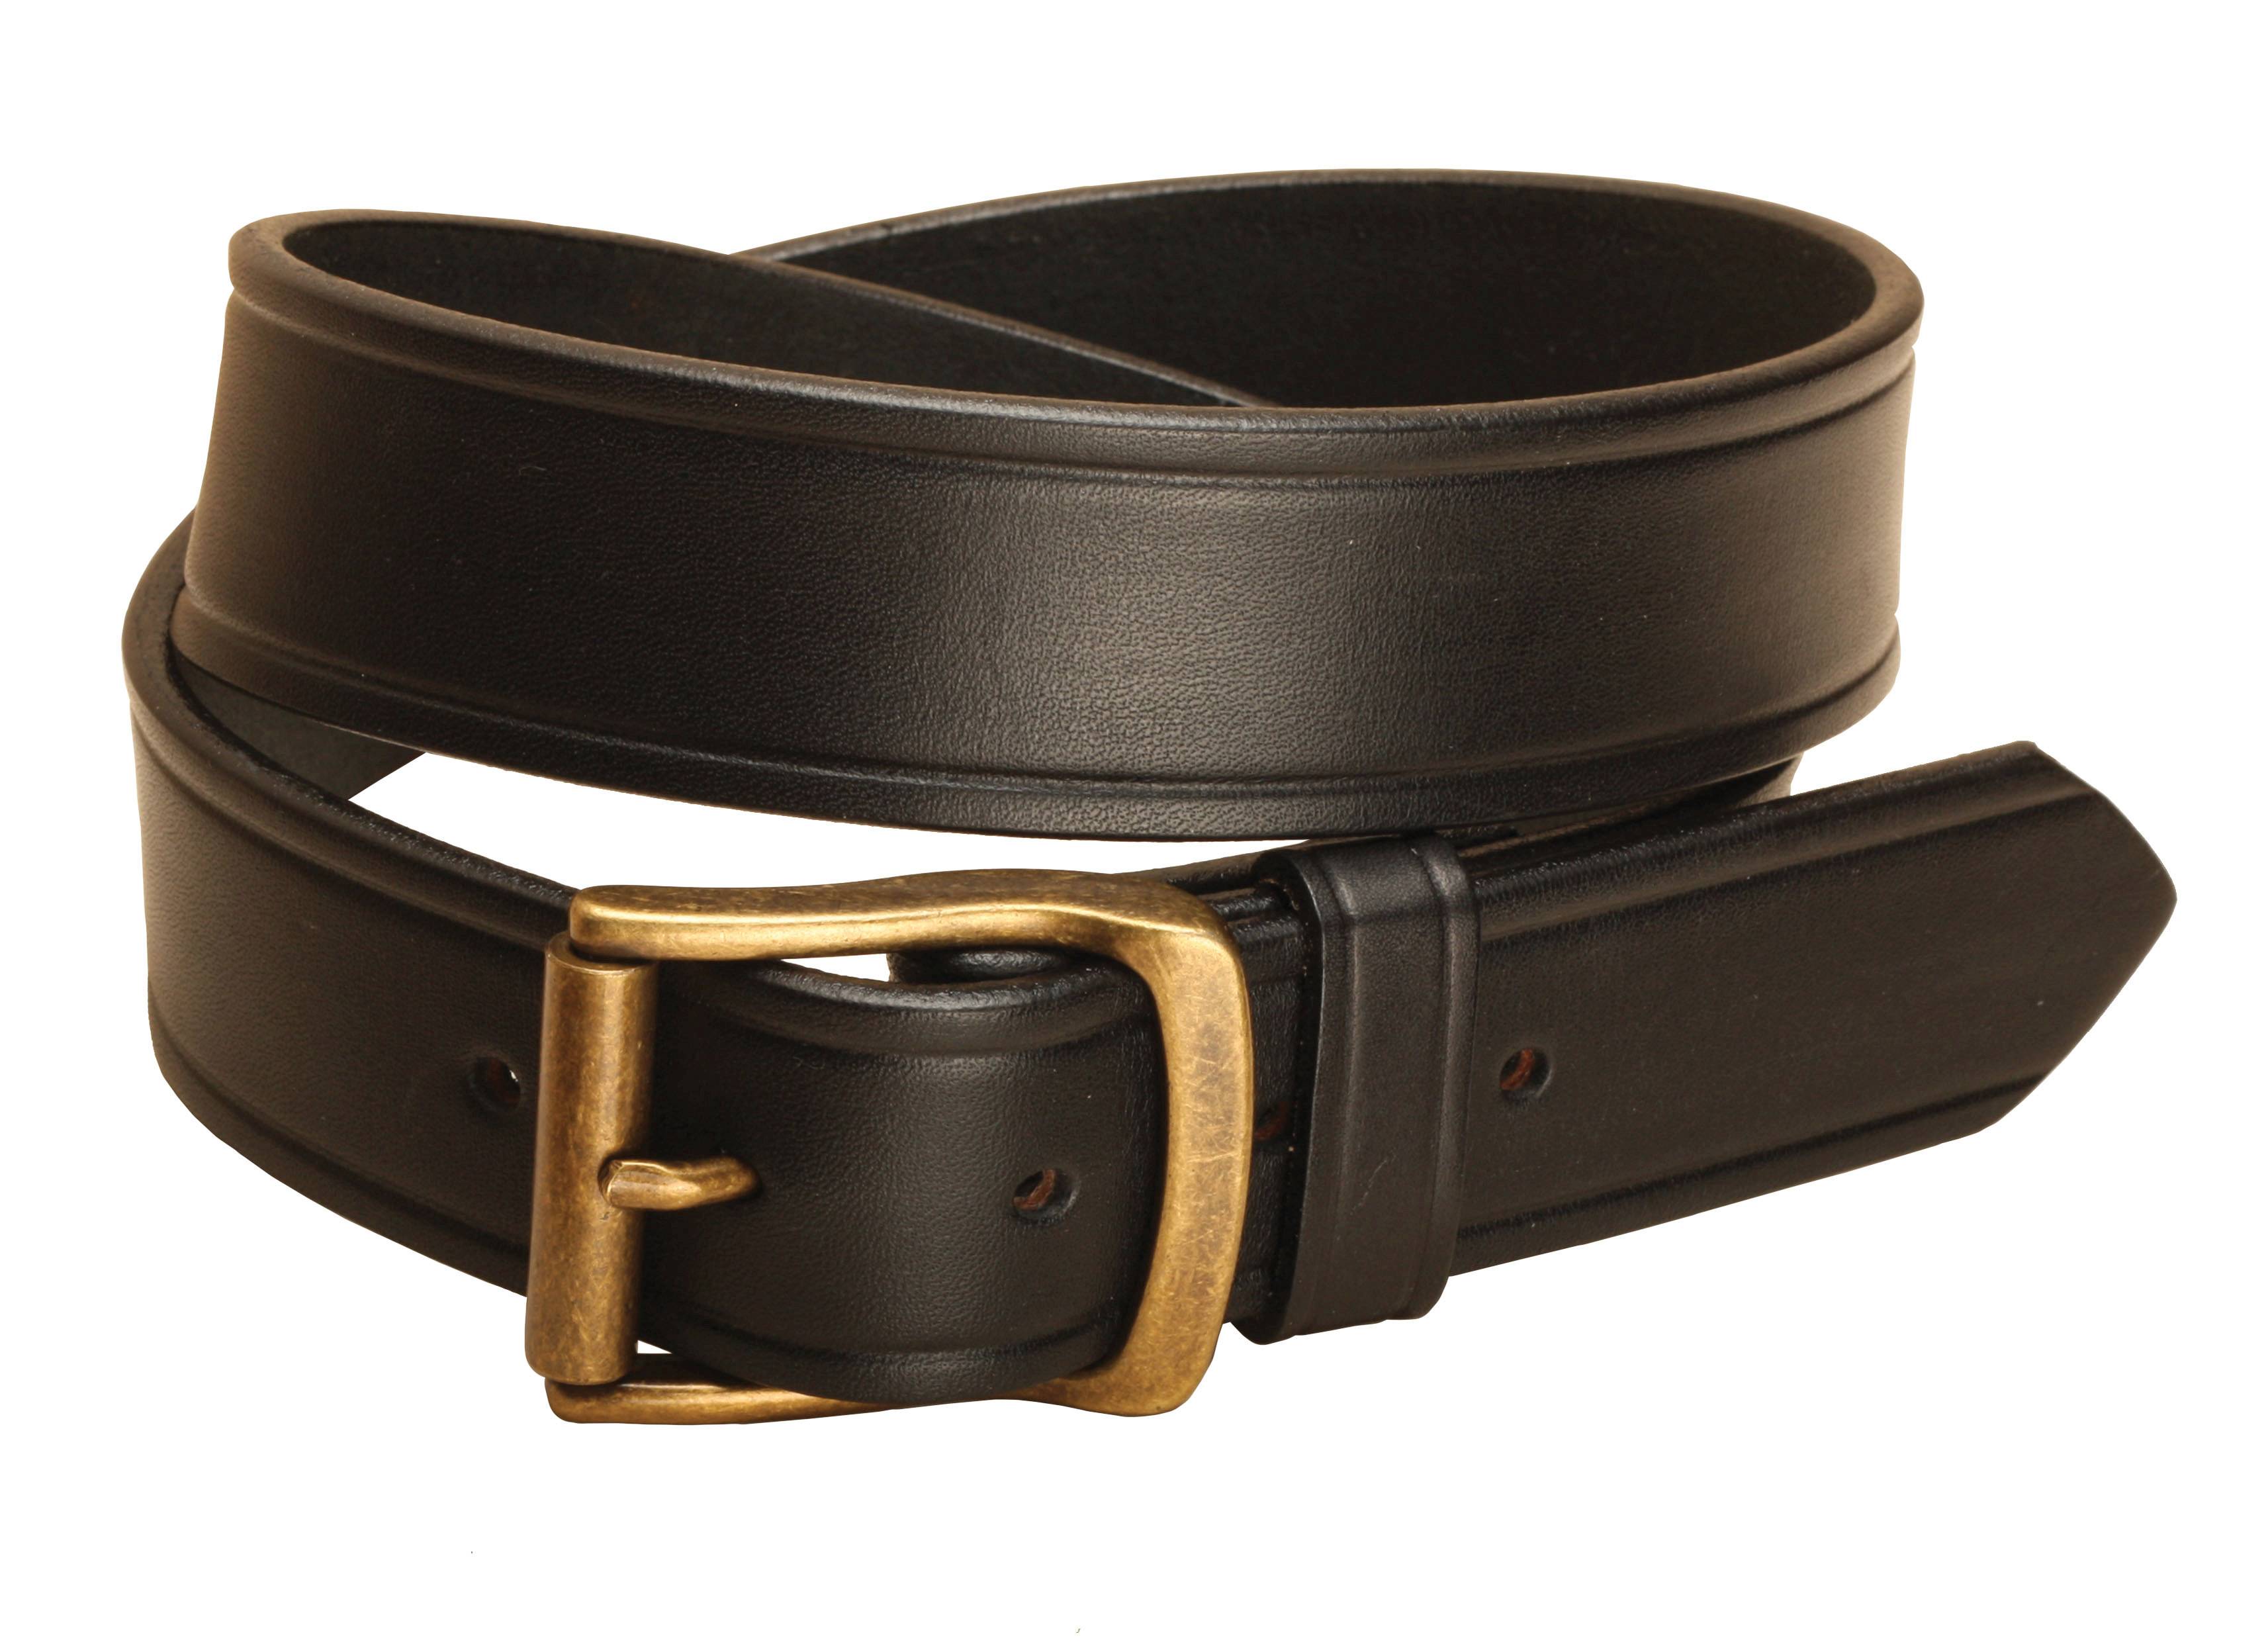 Tory Leather Crossed Keeper Belt with Brass Buckle